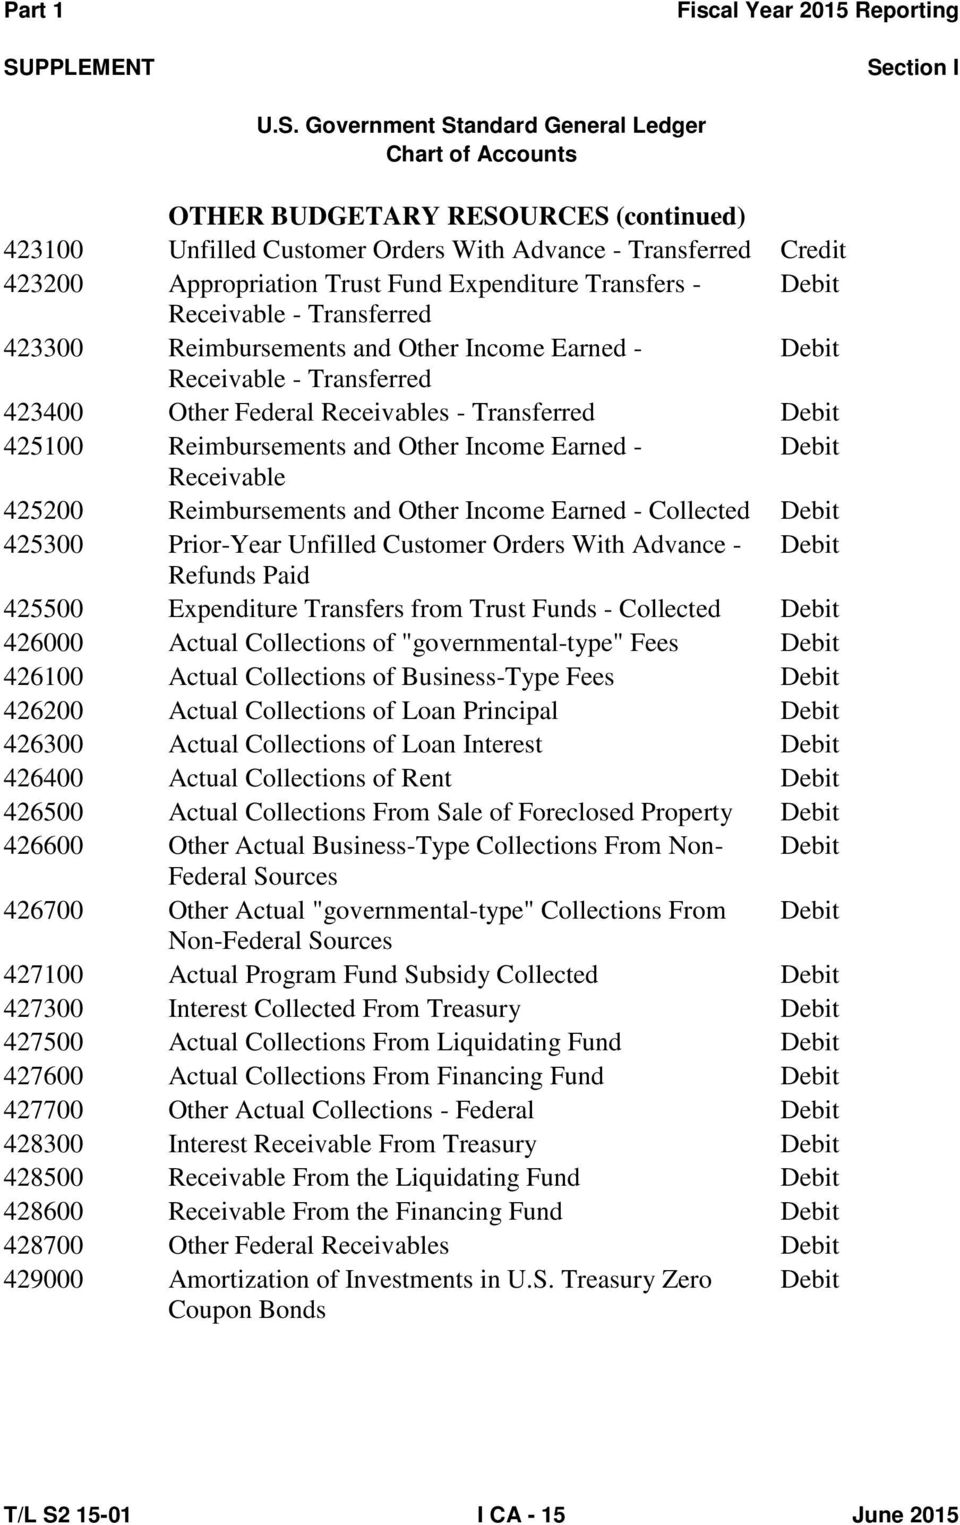 Earned - Collected 425300 Prior-Year Unfilled Customer Orders With Advance - Refunds Paid 425500 Expenditure Transfers from Trust Funds - Collected 426000 Actual Collections of "governmental-type"